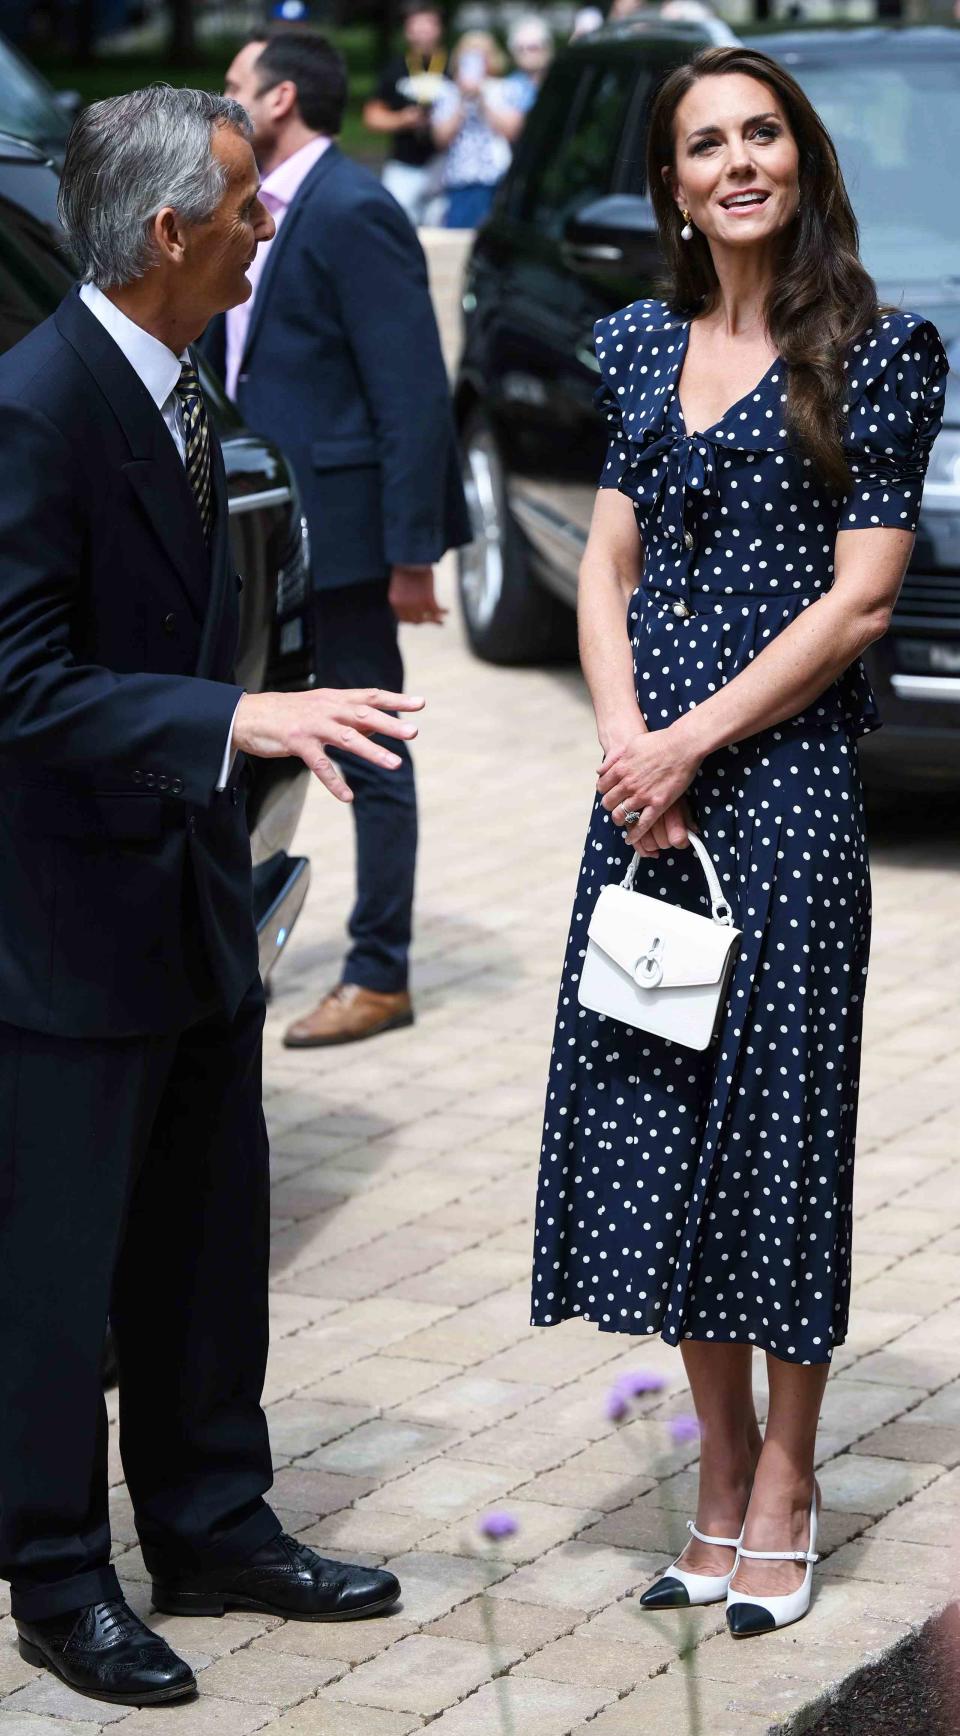 <p>Daniel Leal - WPA Pool/Getty Images</p> Kate Middleton